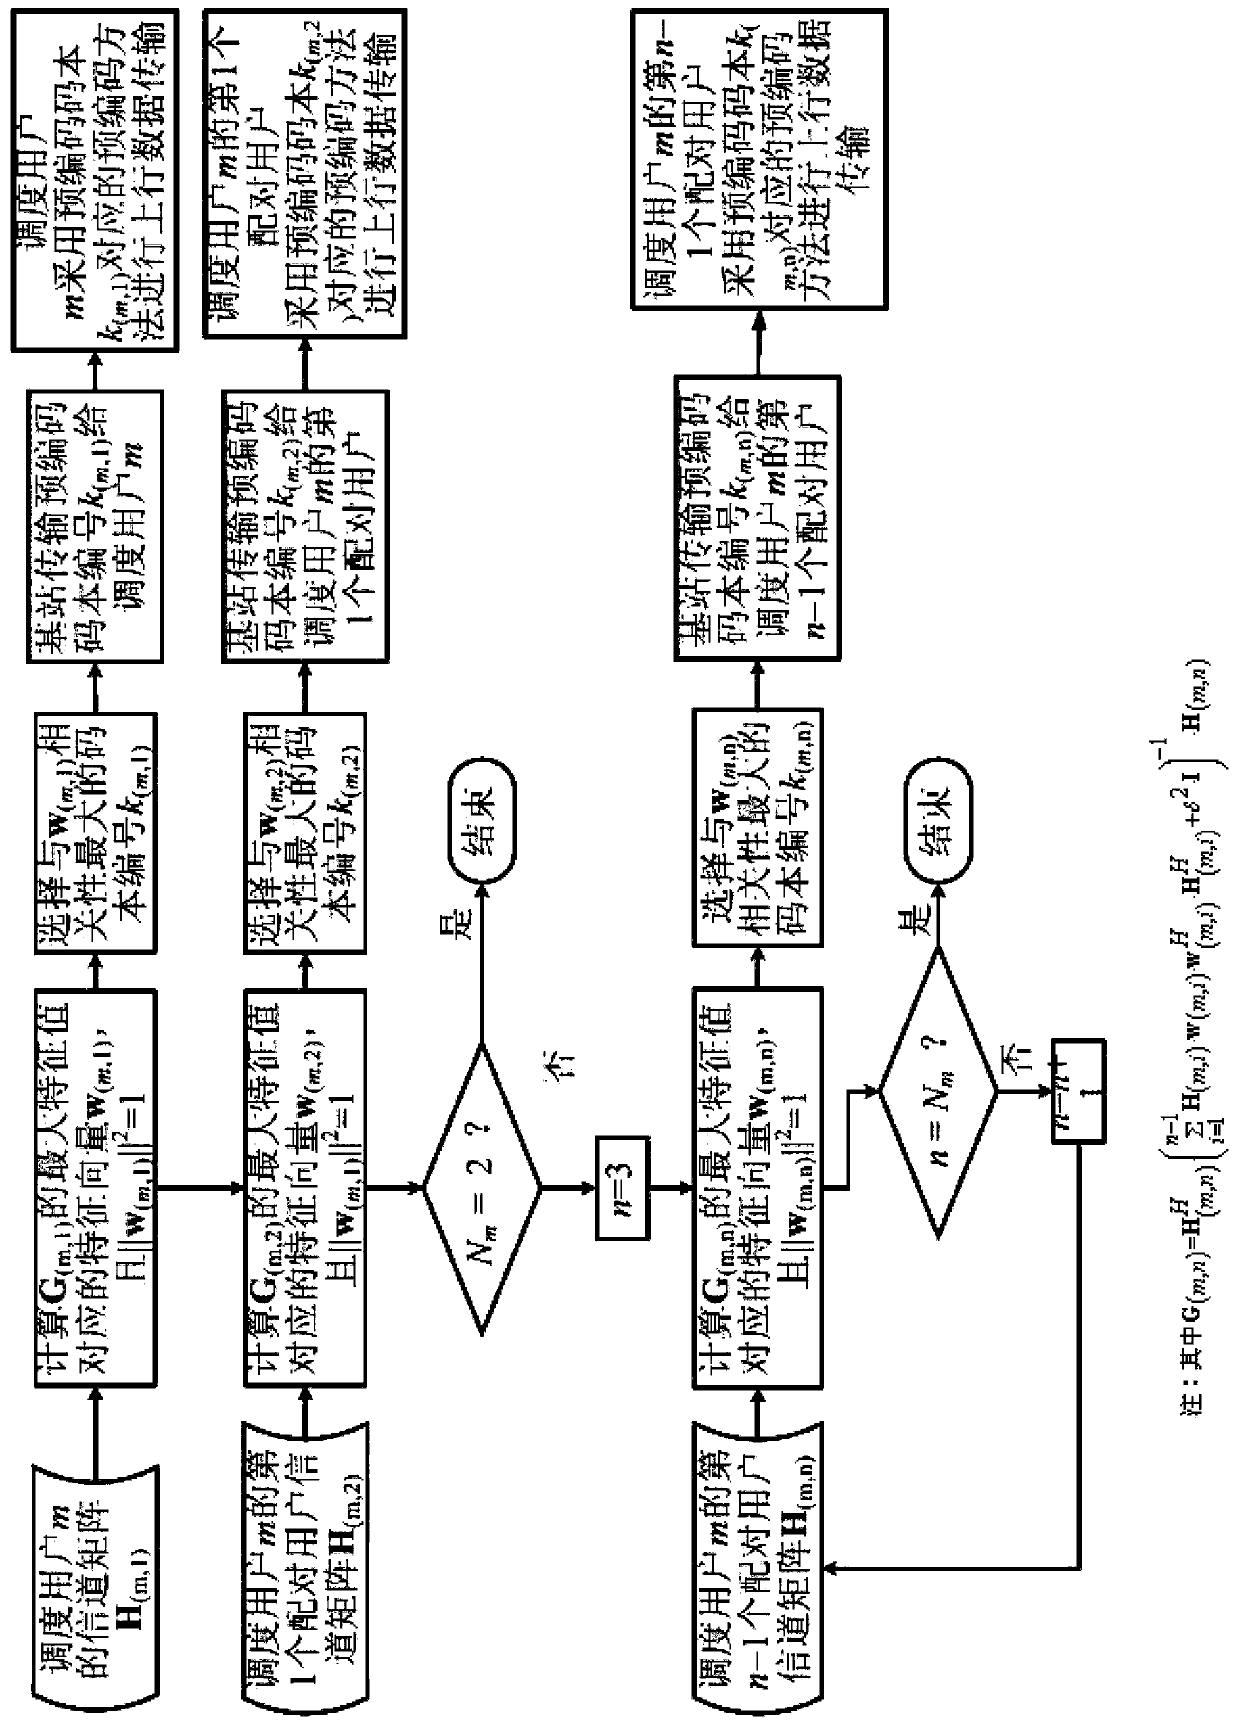 A Beamforming Method for Multi-user Paired Virtual MIMO System